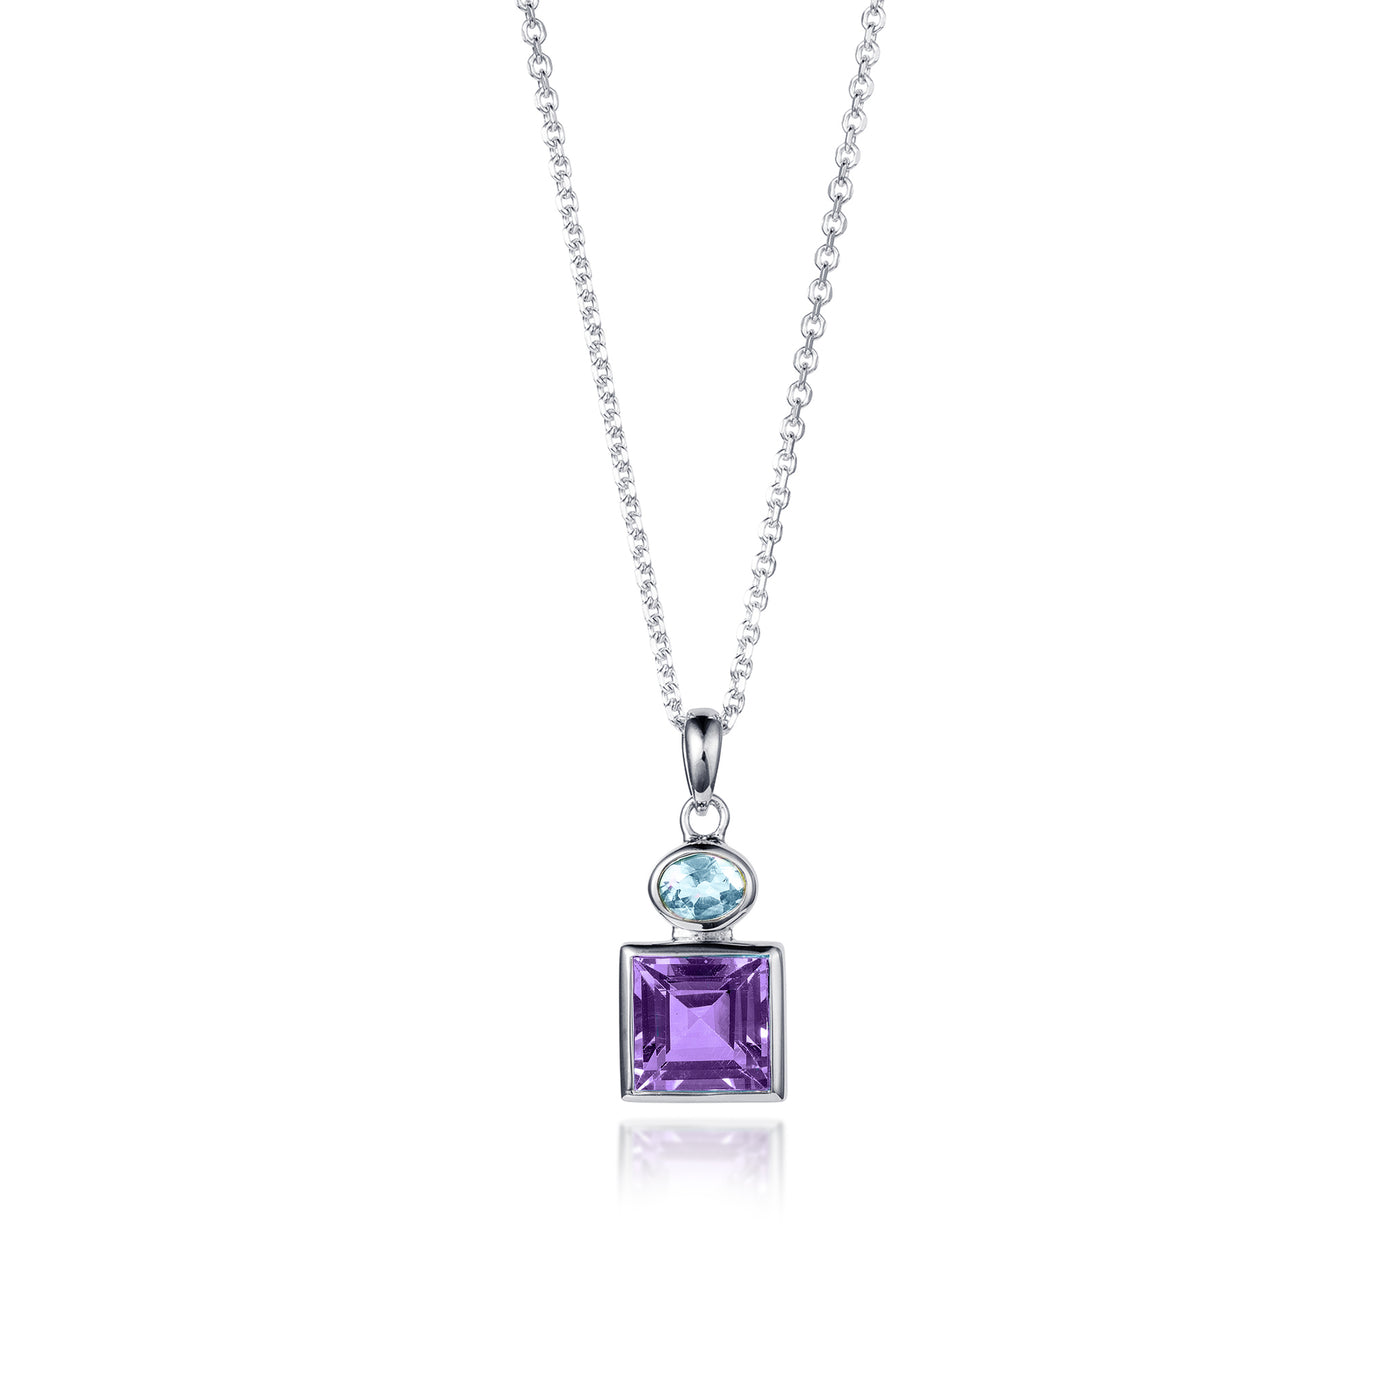 Photo of Silver Amethyst and Blue Topaz Pendant Necklace